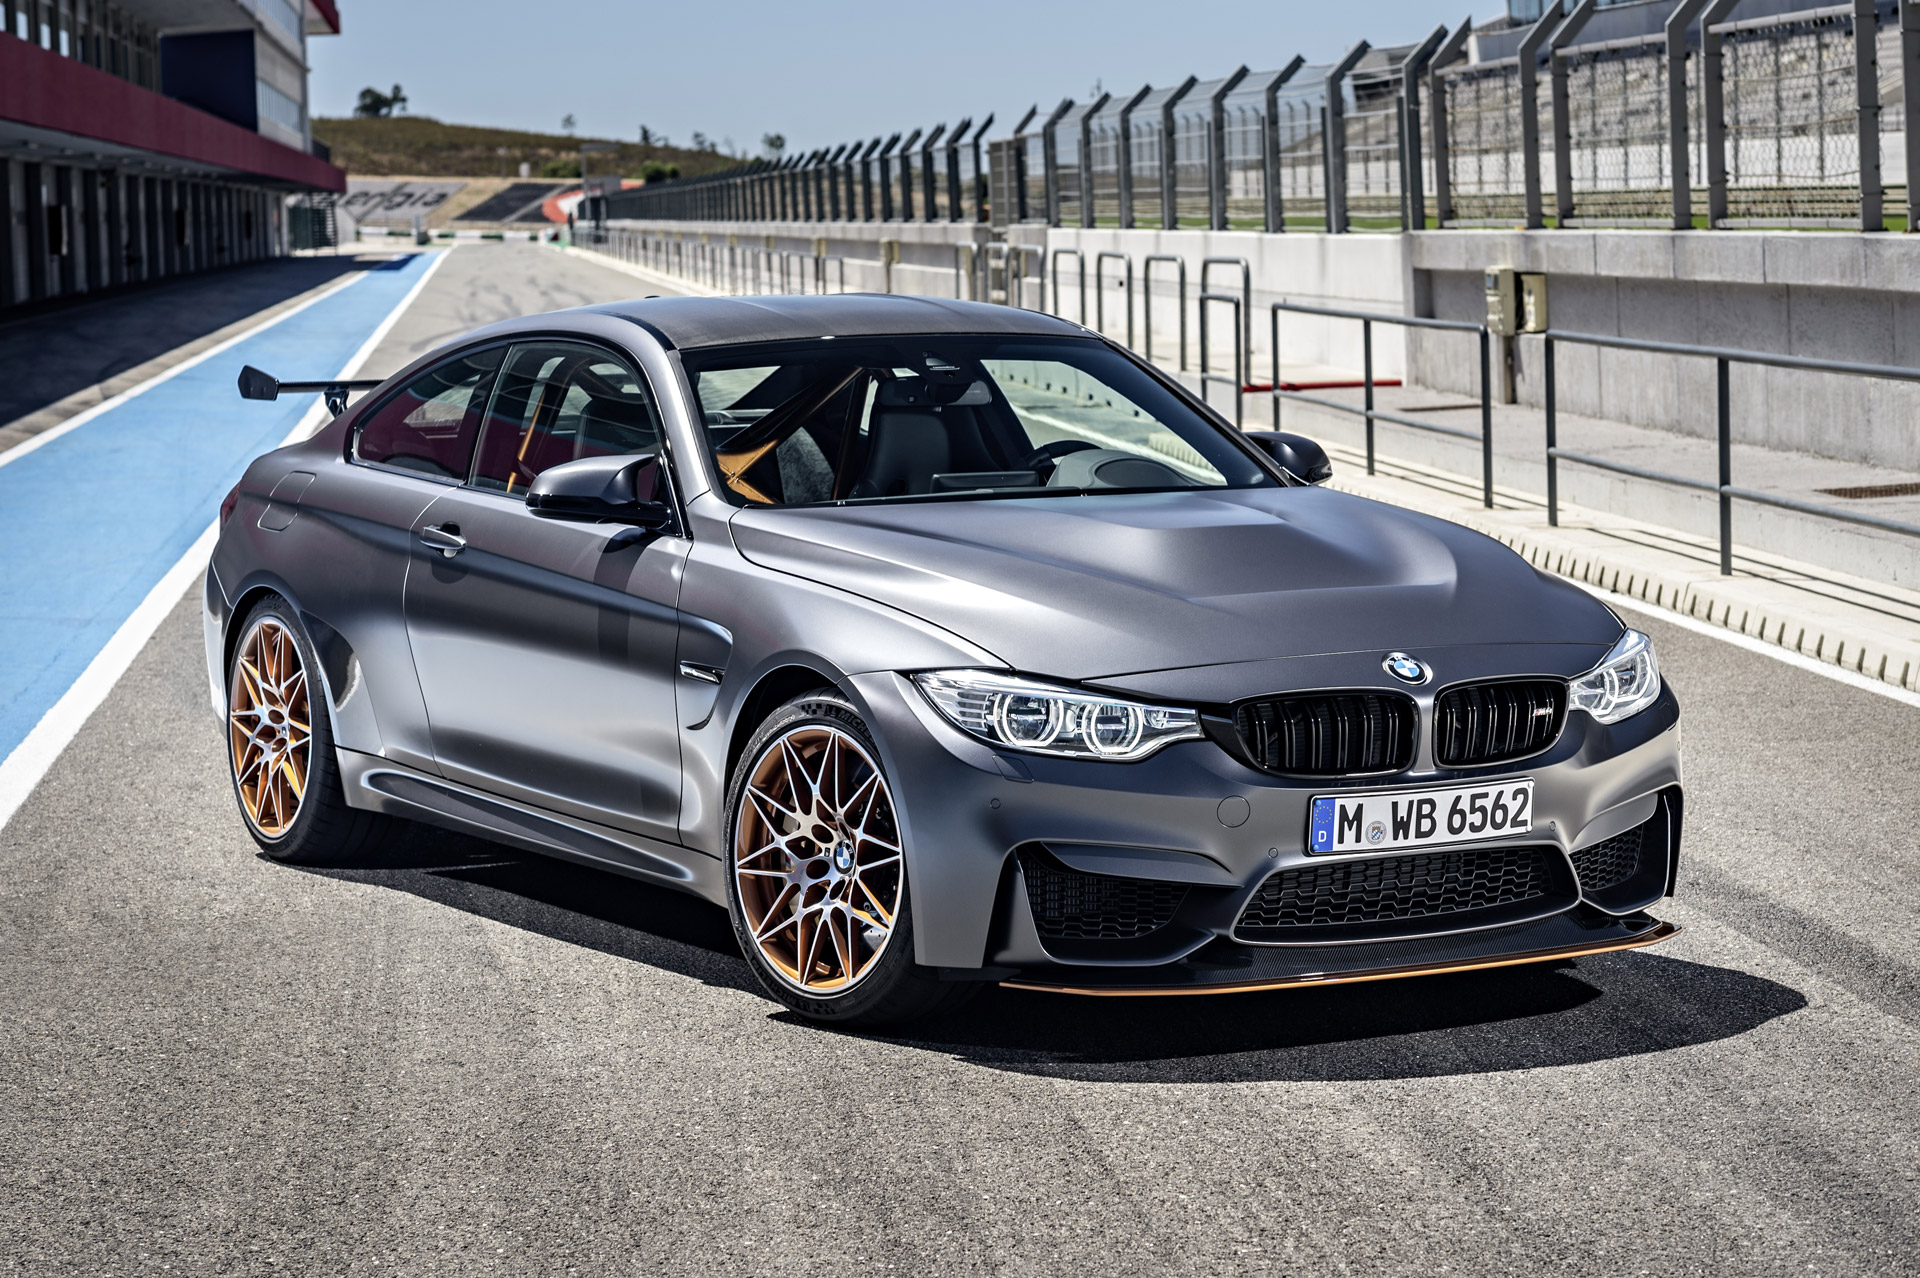 BMW M4 GTS – New Review Highlights Exceptional Driving Capabilities and Performance